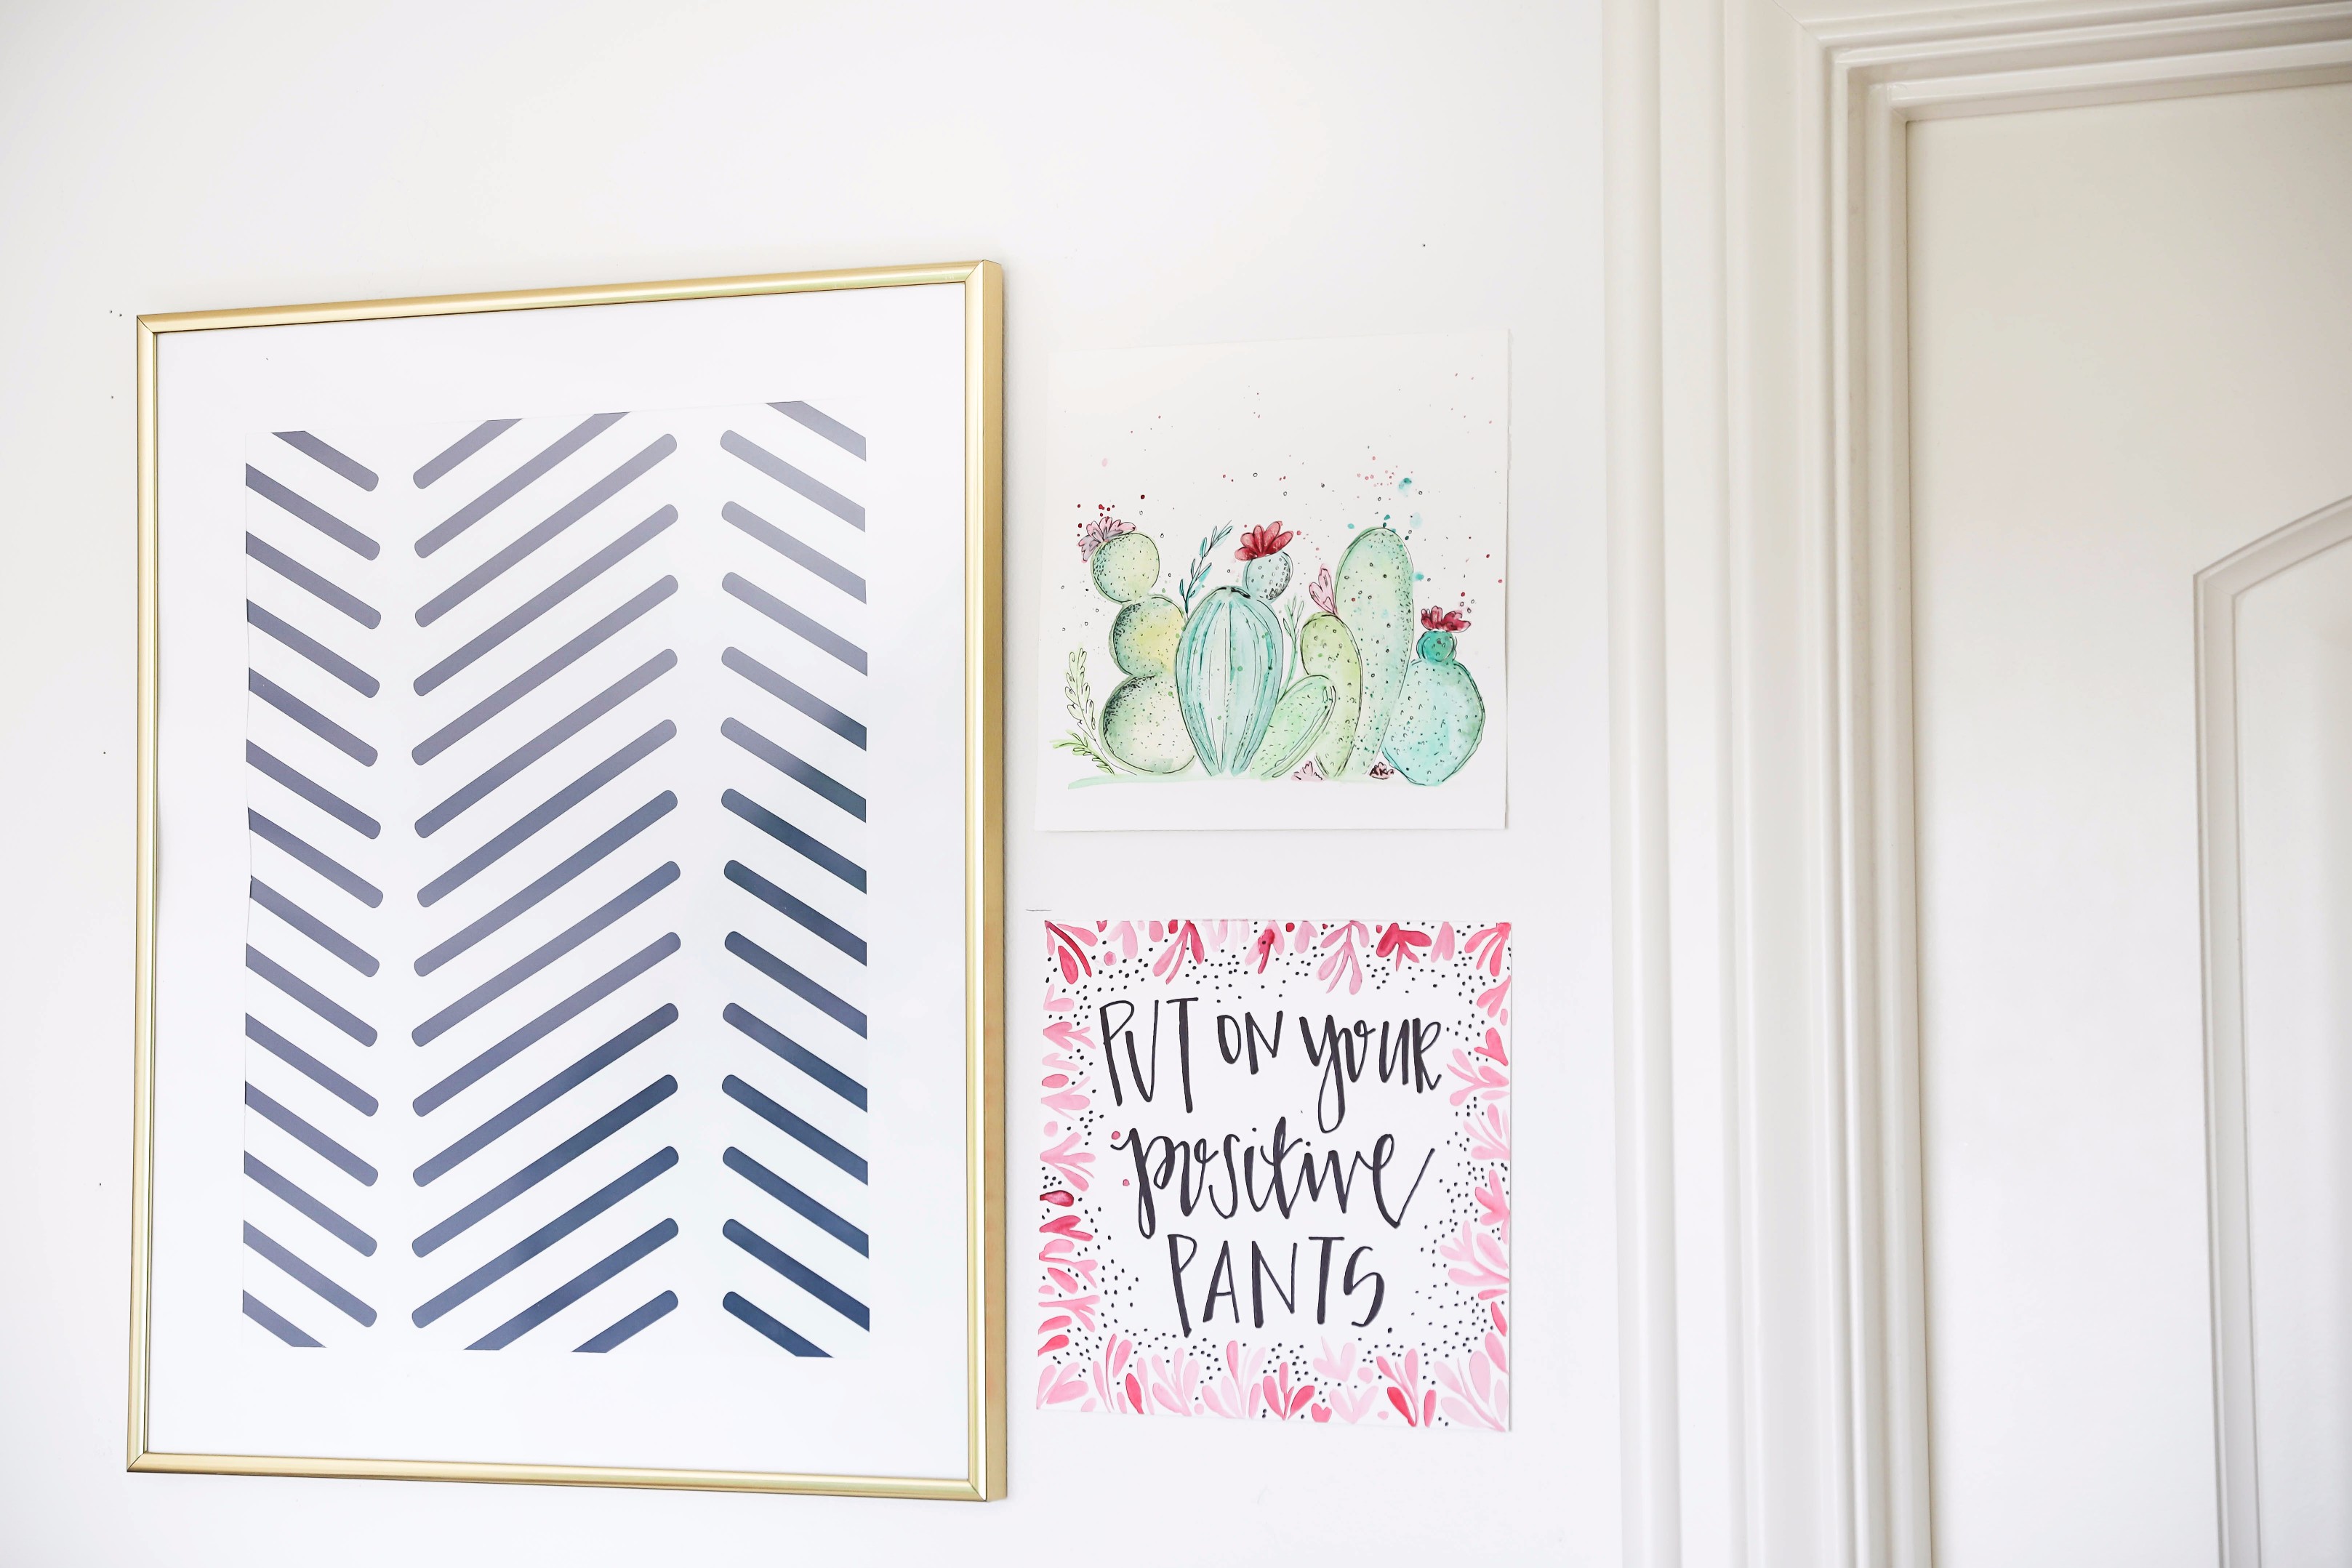 Palm leaf room tour! The perfect summer room decor is up this cute blog! I can't get enough of the palm leaves, tropical decor! Check out all the details on fashion and design blog daily dose of charm by lauren lindmark